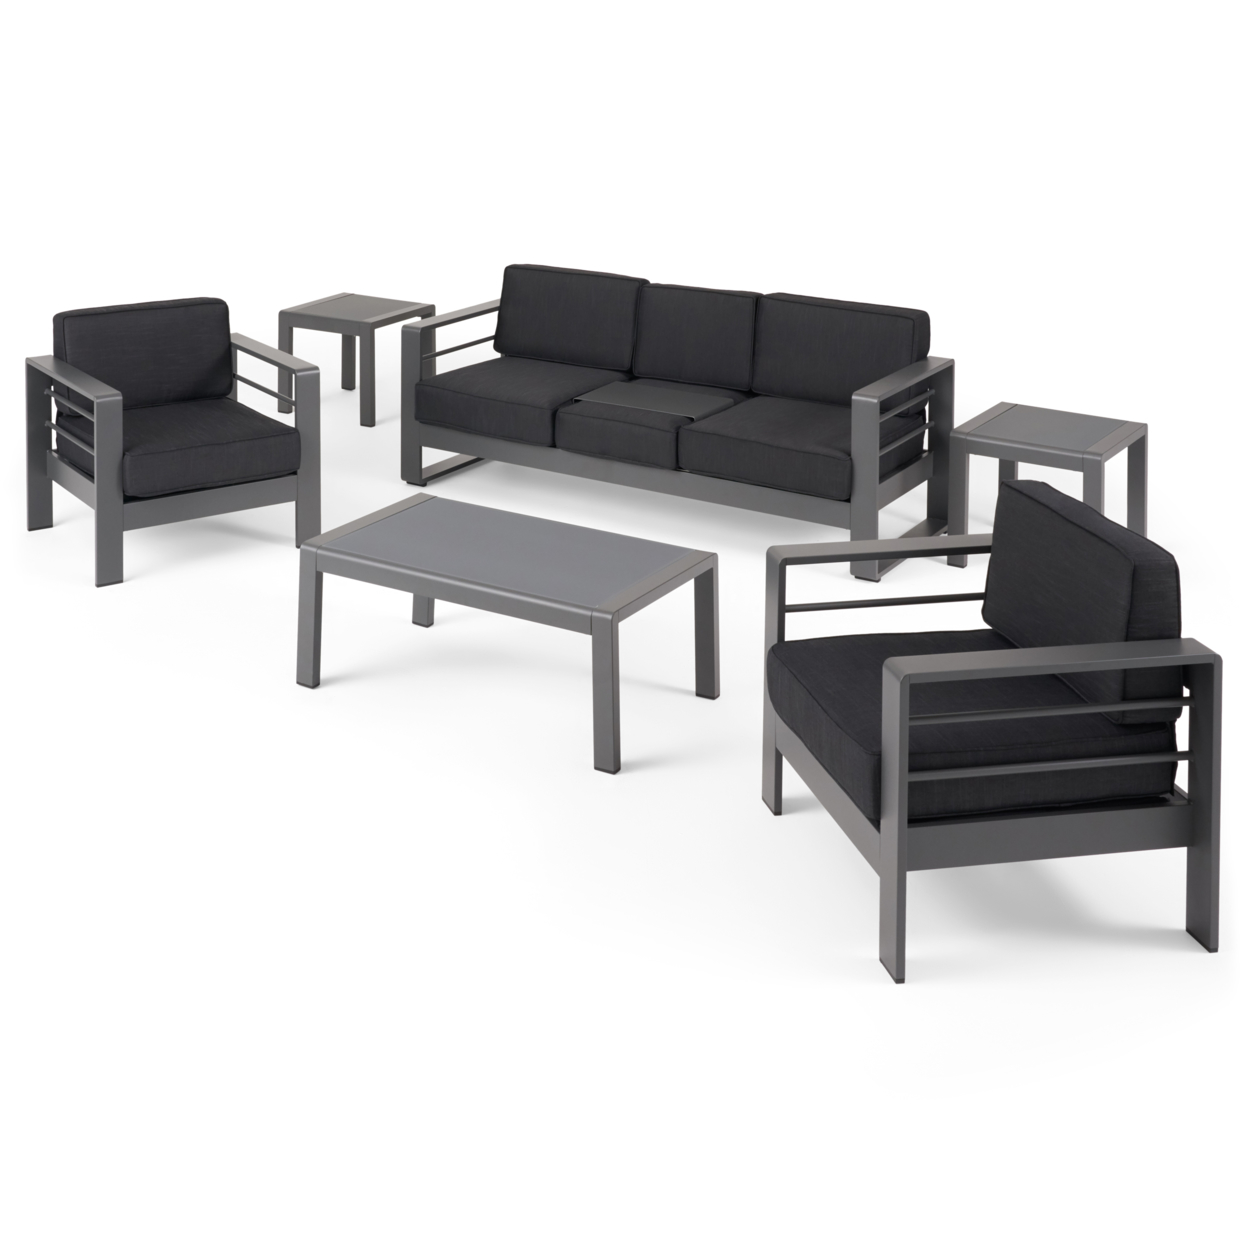 Cherie Outdoor 5 Seater Aluminum Sofa Chat Set With 2 Side Tables - Gray, Dark Gray